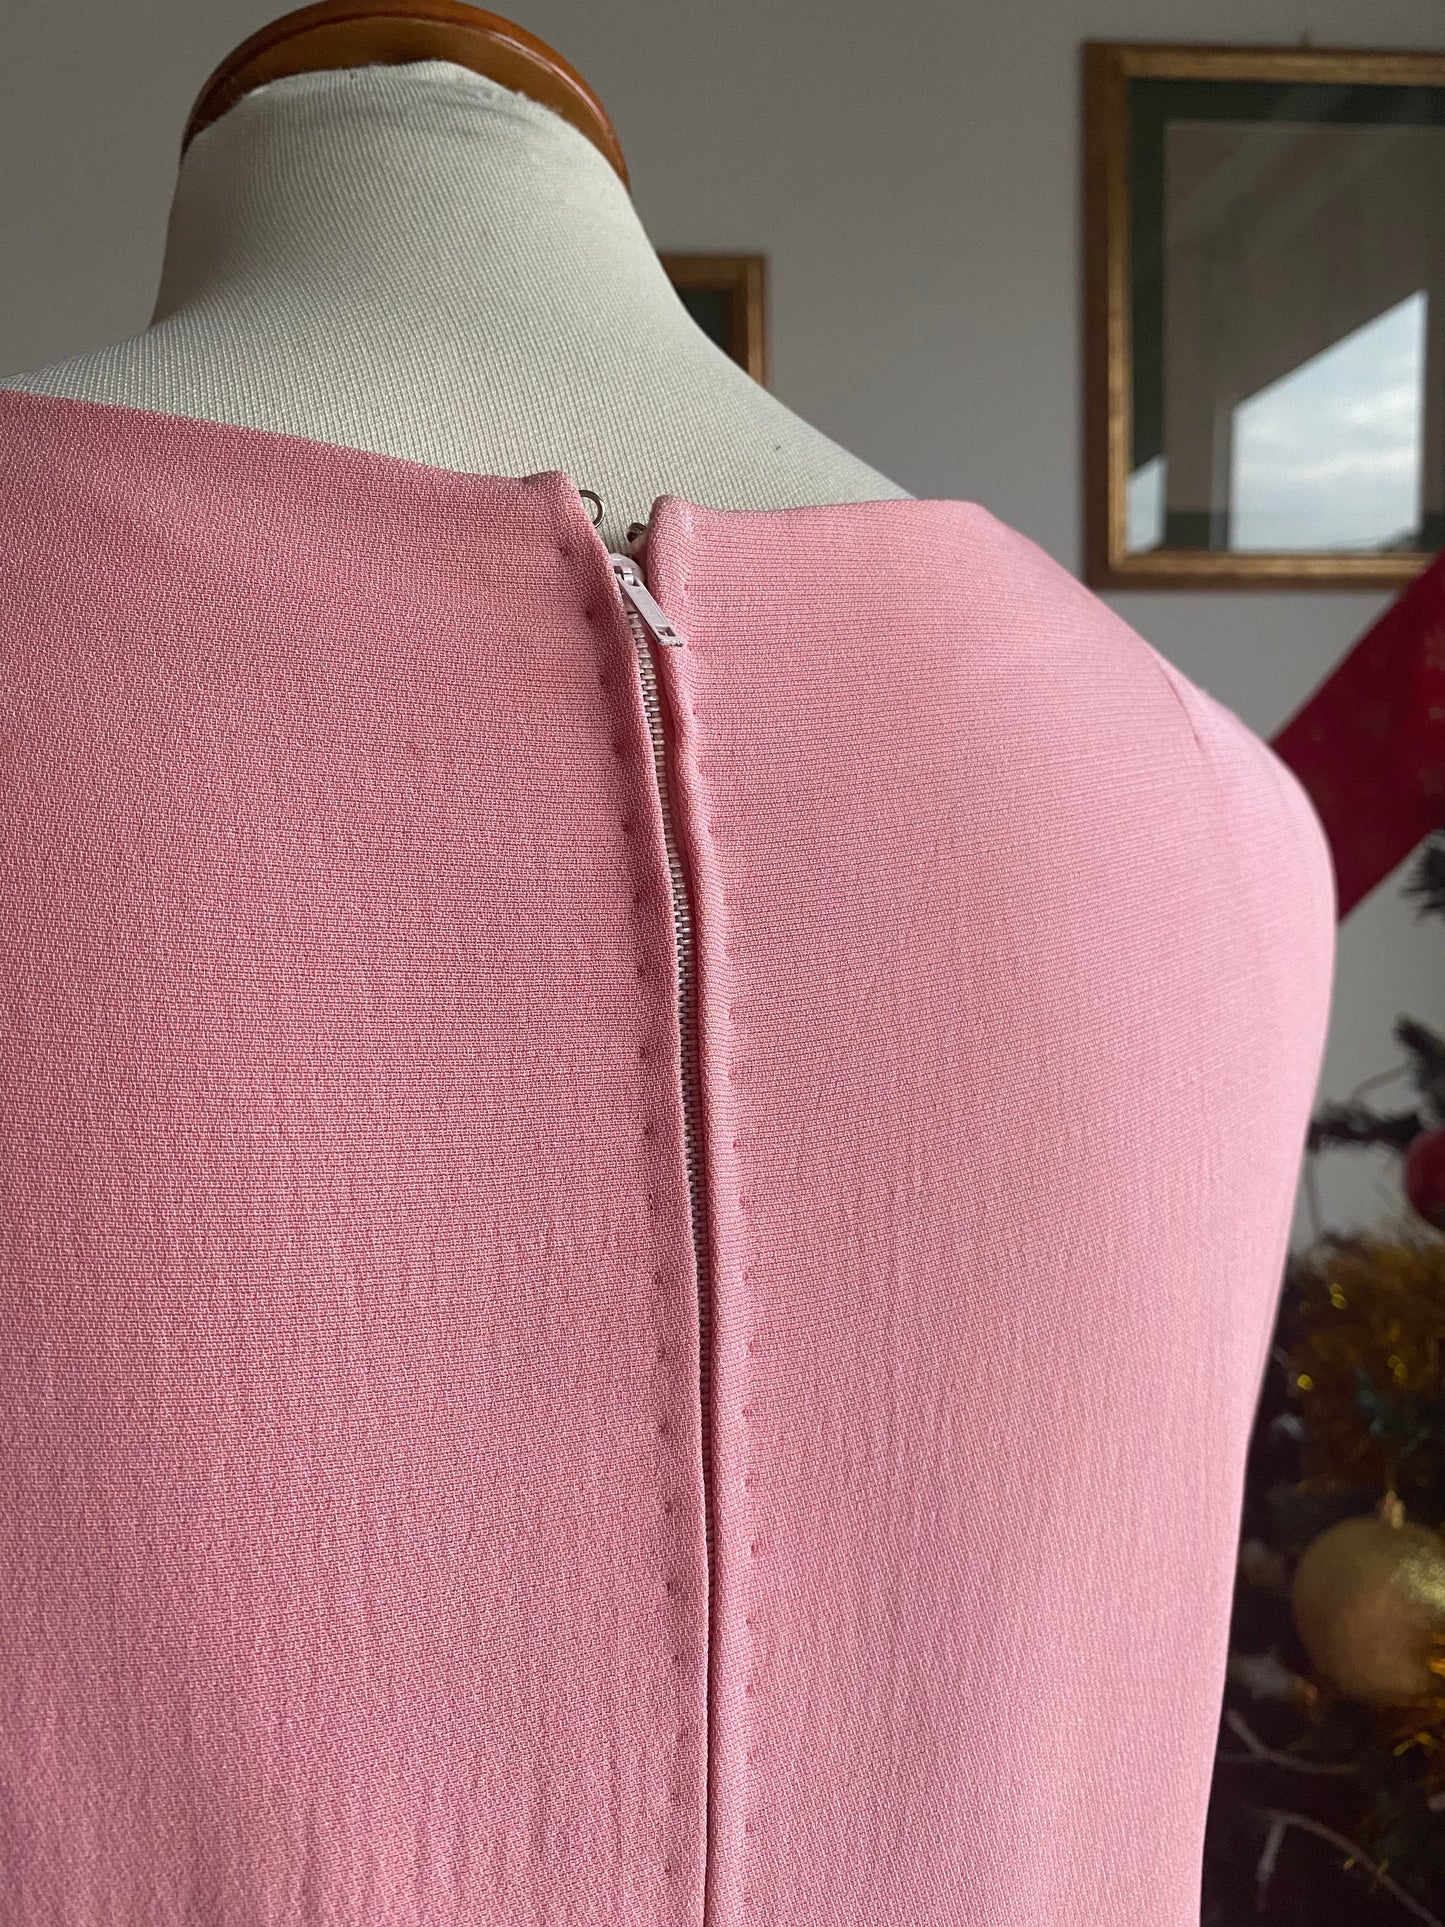 1960s pink cocktail dress